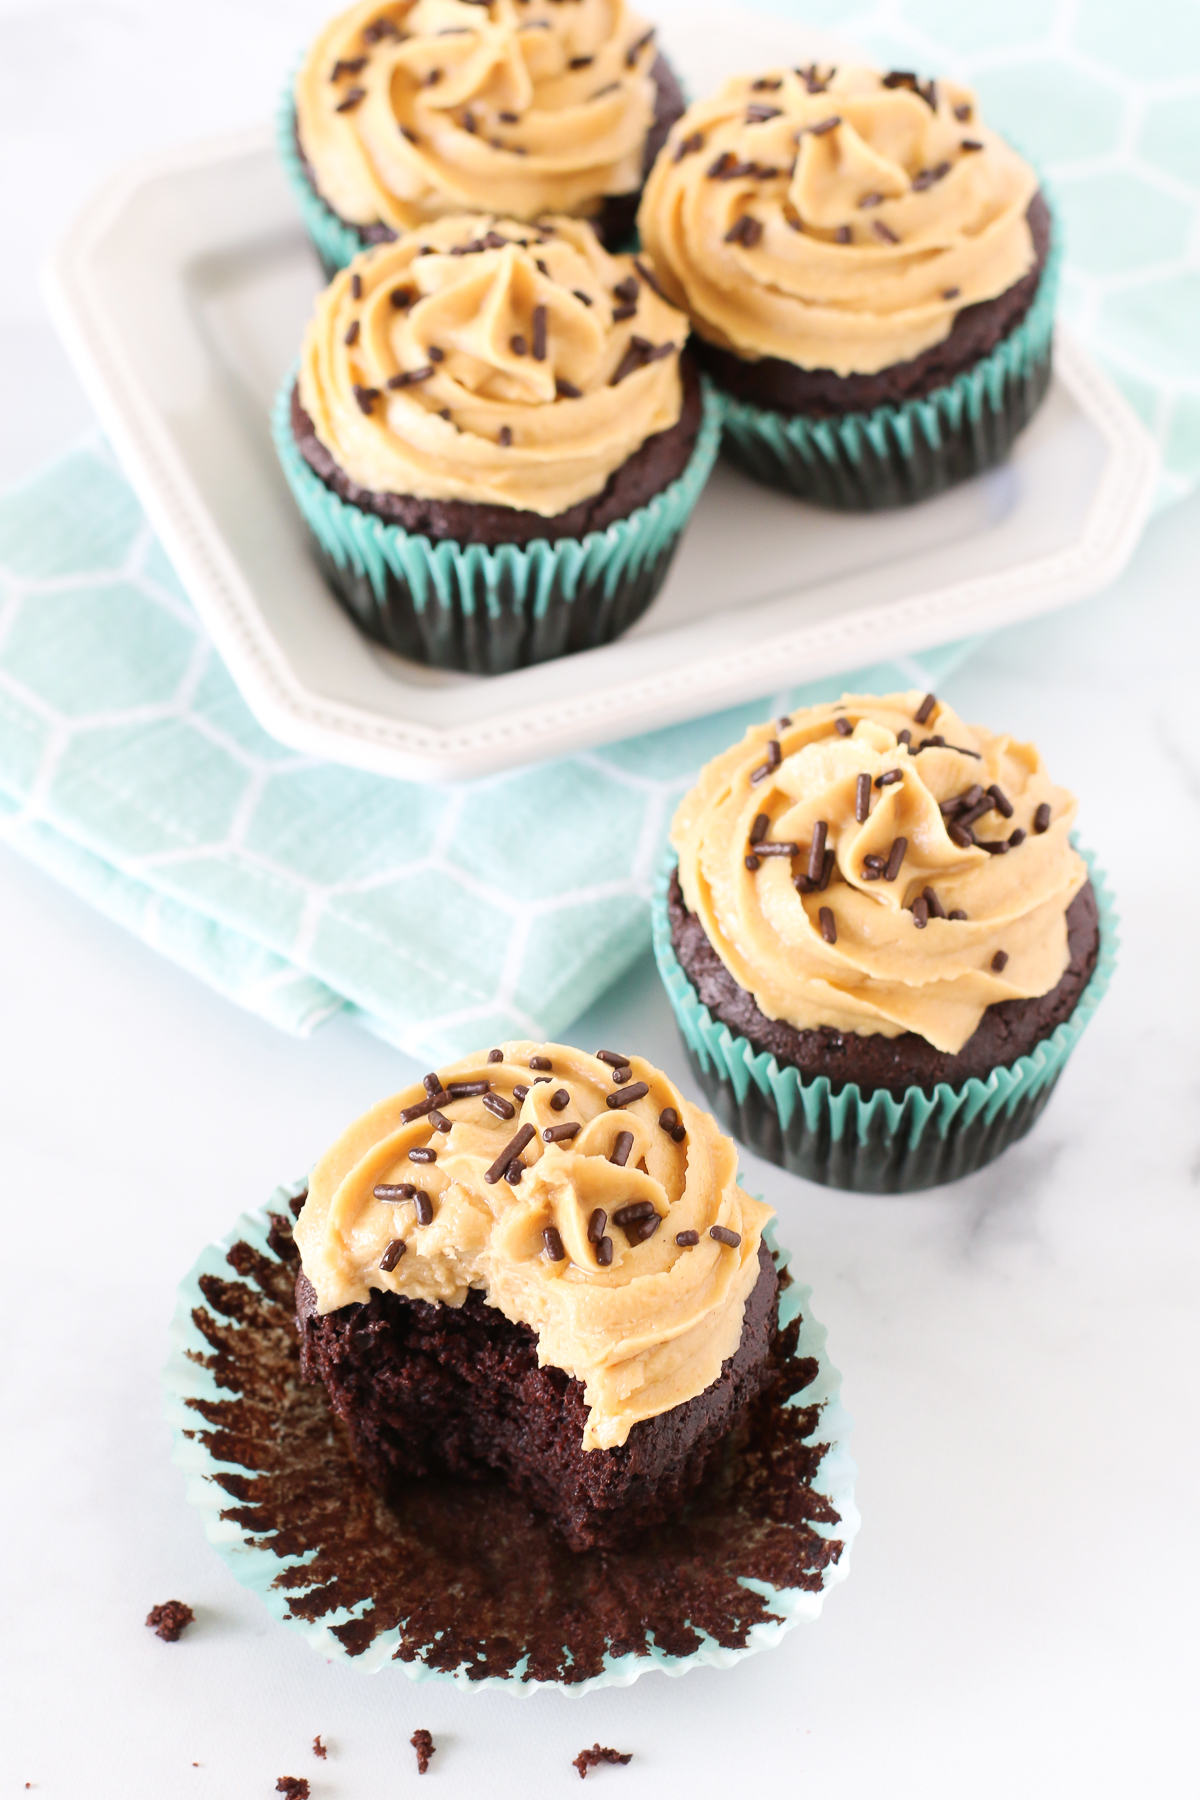 Gluten Free Vegan Chocolate Peanut Butter Cupcakes. Fluffy chocolate cupcakes with a creamy, dreamy peanut butter frosting. 